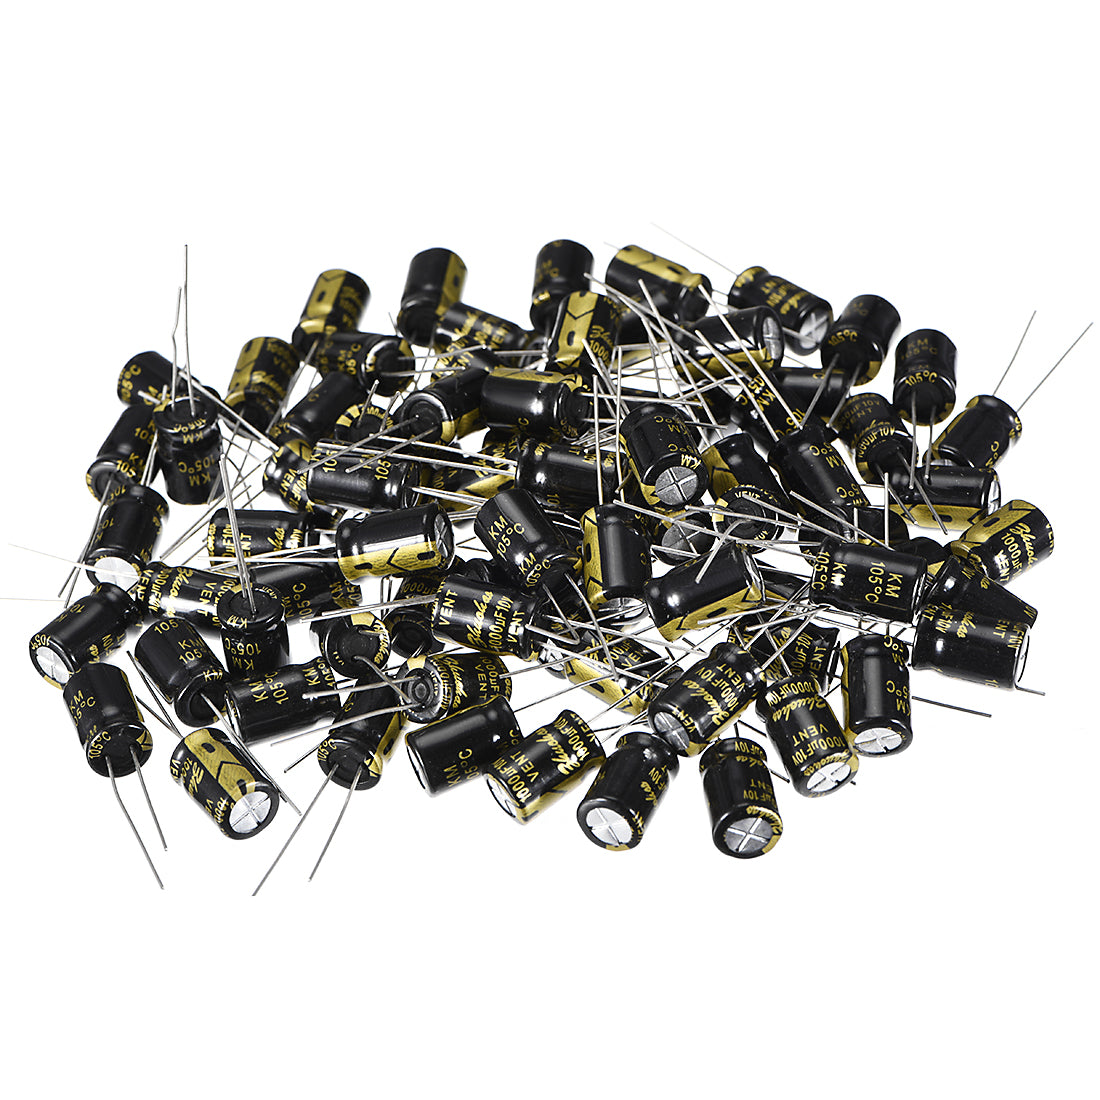 uxcell Uxcell Aluminum Radial Electrolytic Capacitor with 1000uF 10V 105 Celsius Life 2000H 8 x 12 mm Black 80pcs